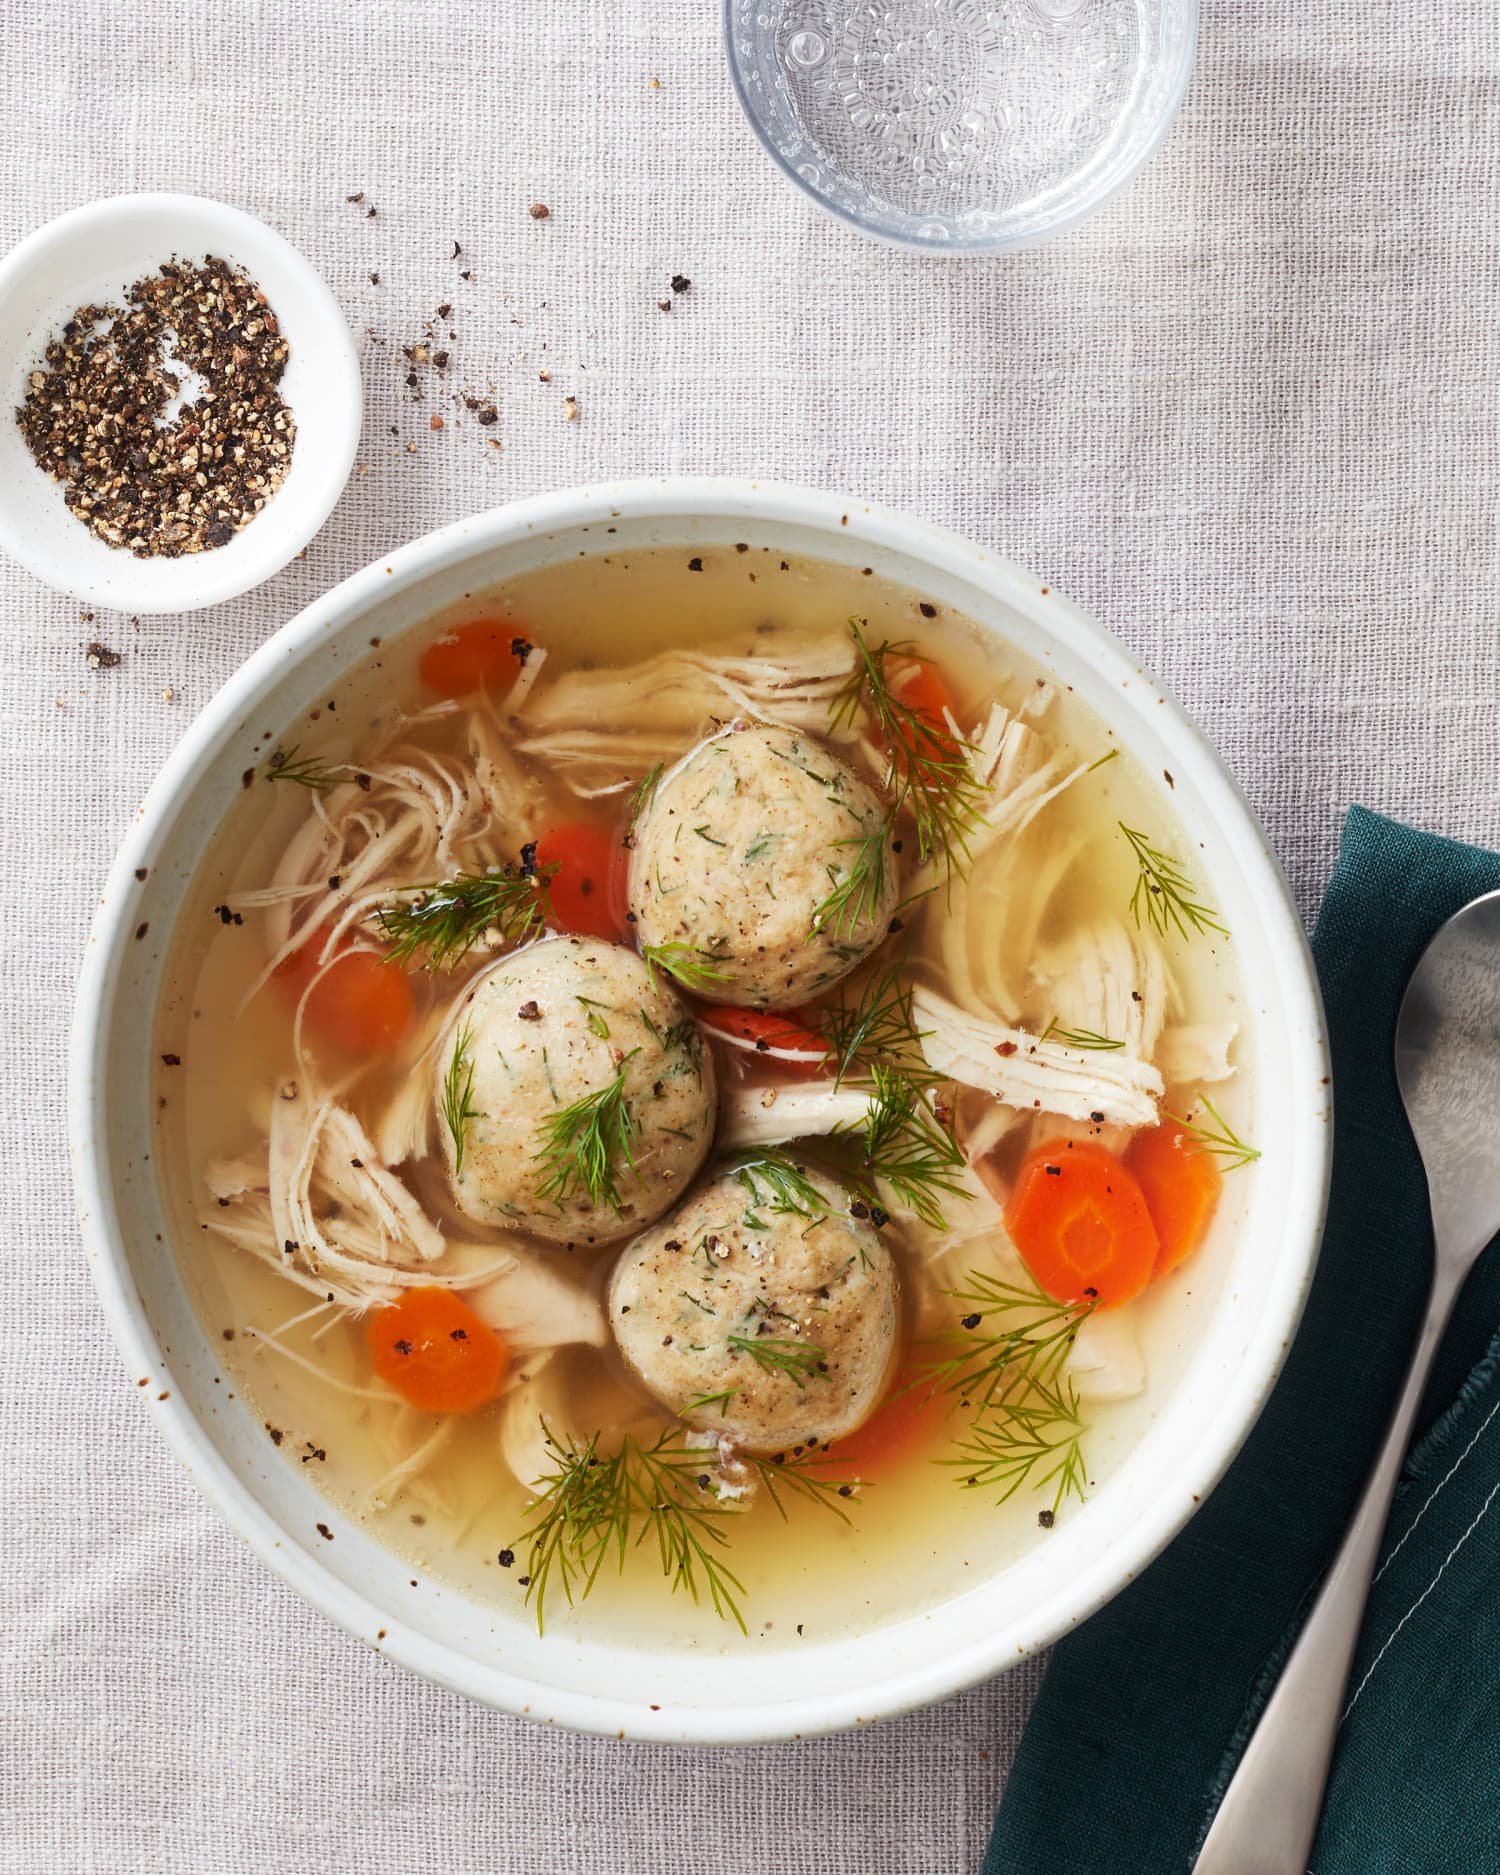 How To Make the Best Matzo Ball Soup from Scratch